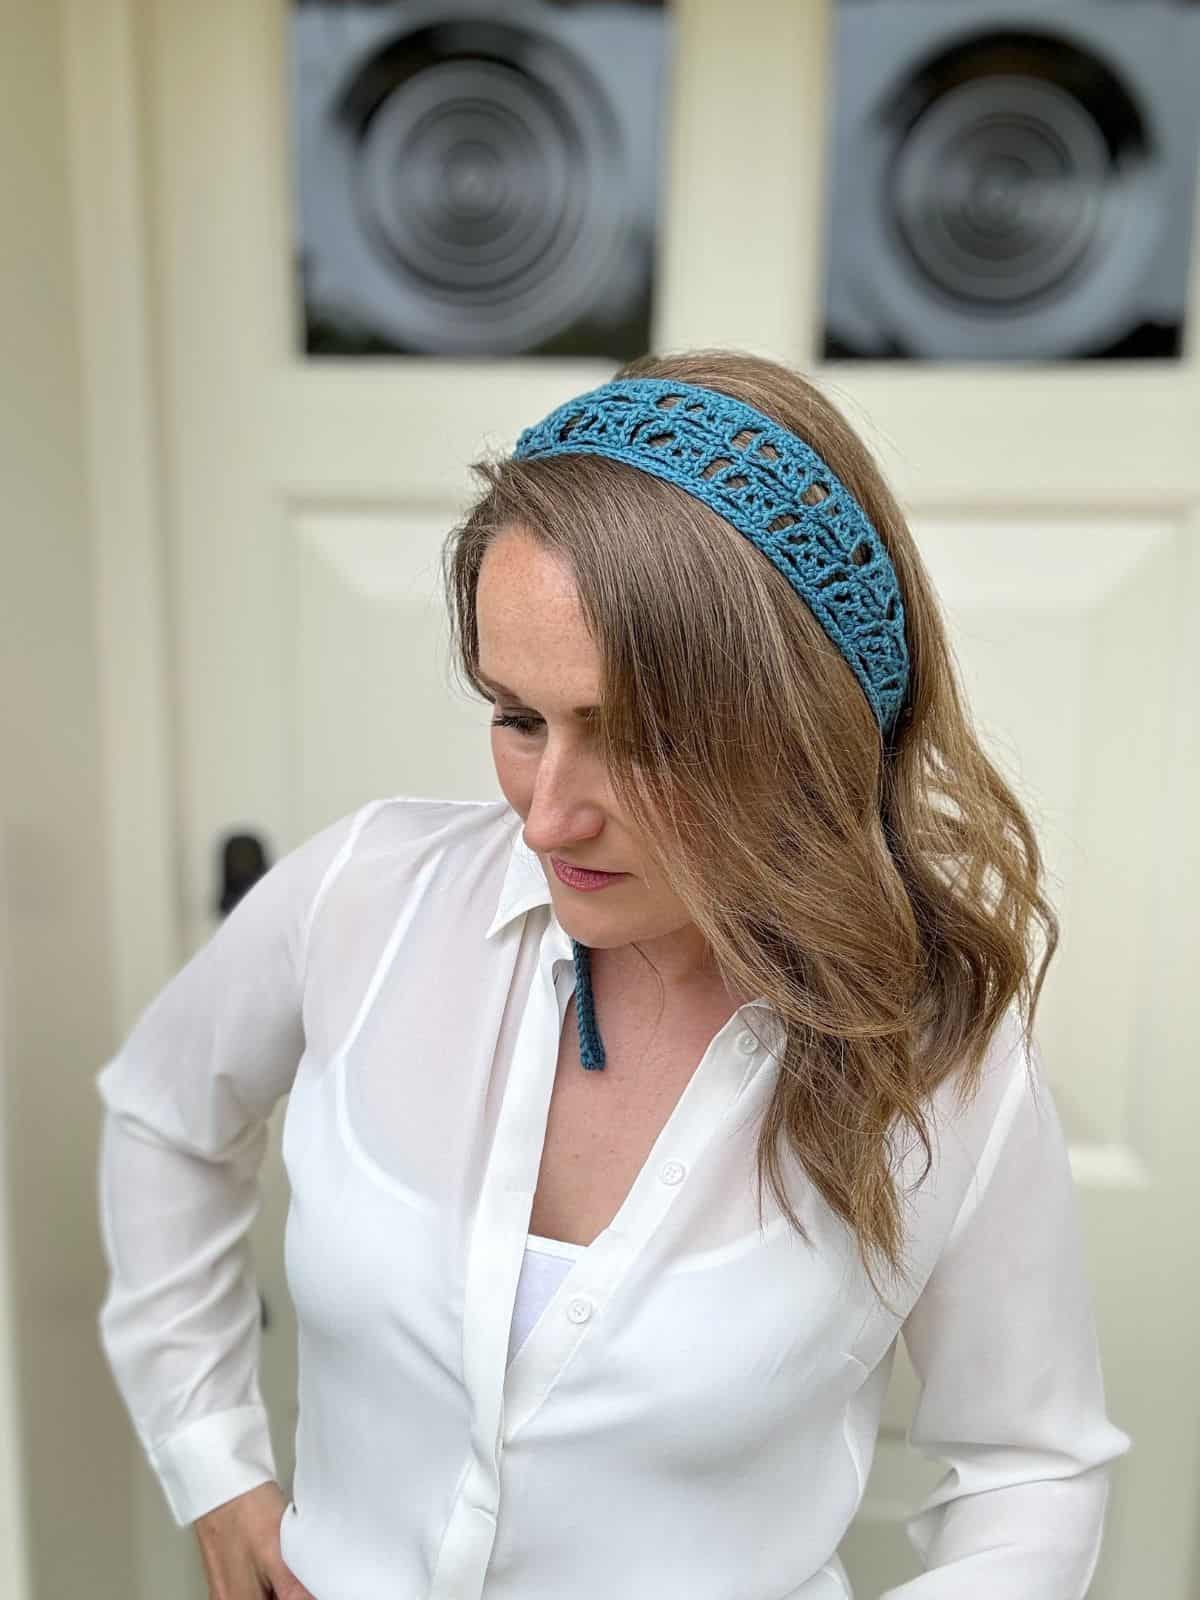 A woman with medium-length, wavy hair wears a blue lace headband and a white blouse. She is looking down, standing in front of a door with circular designs on the glass panels.